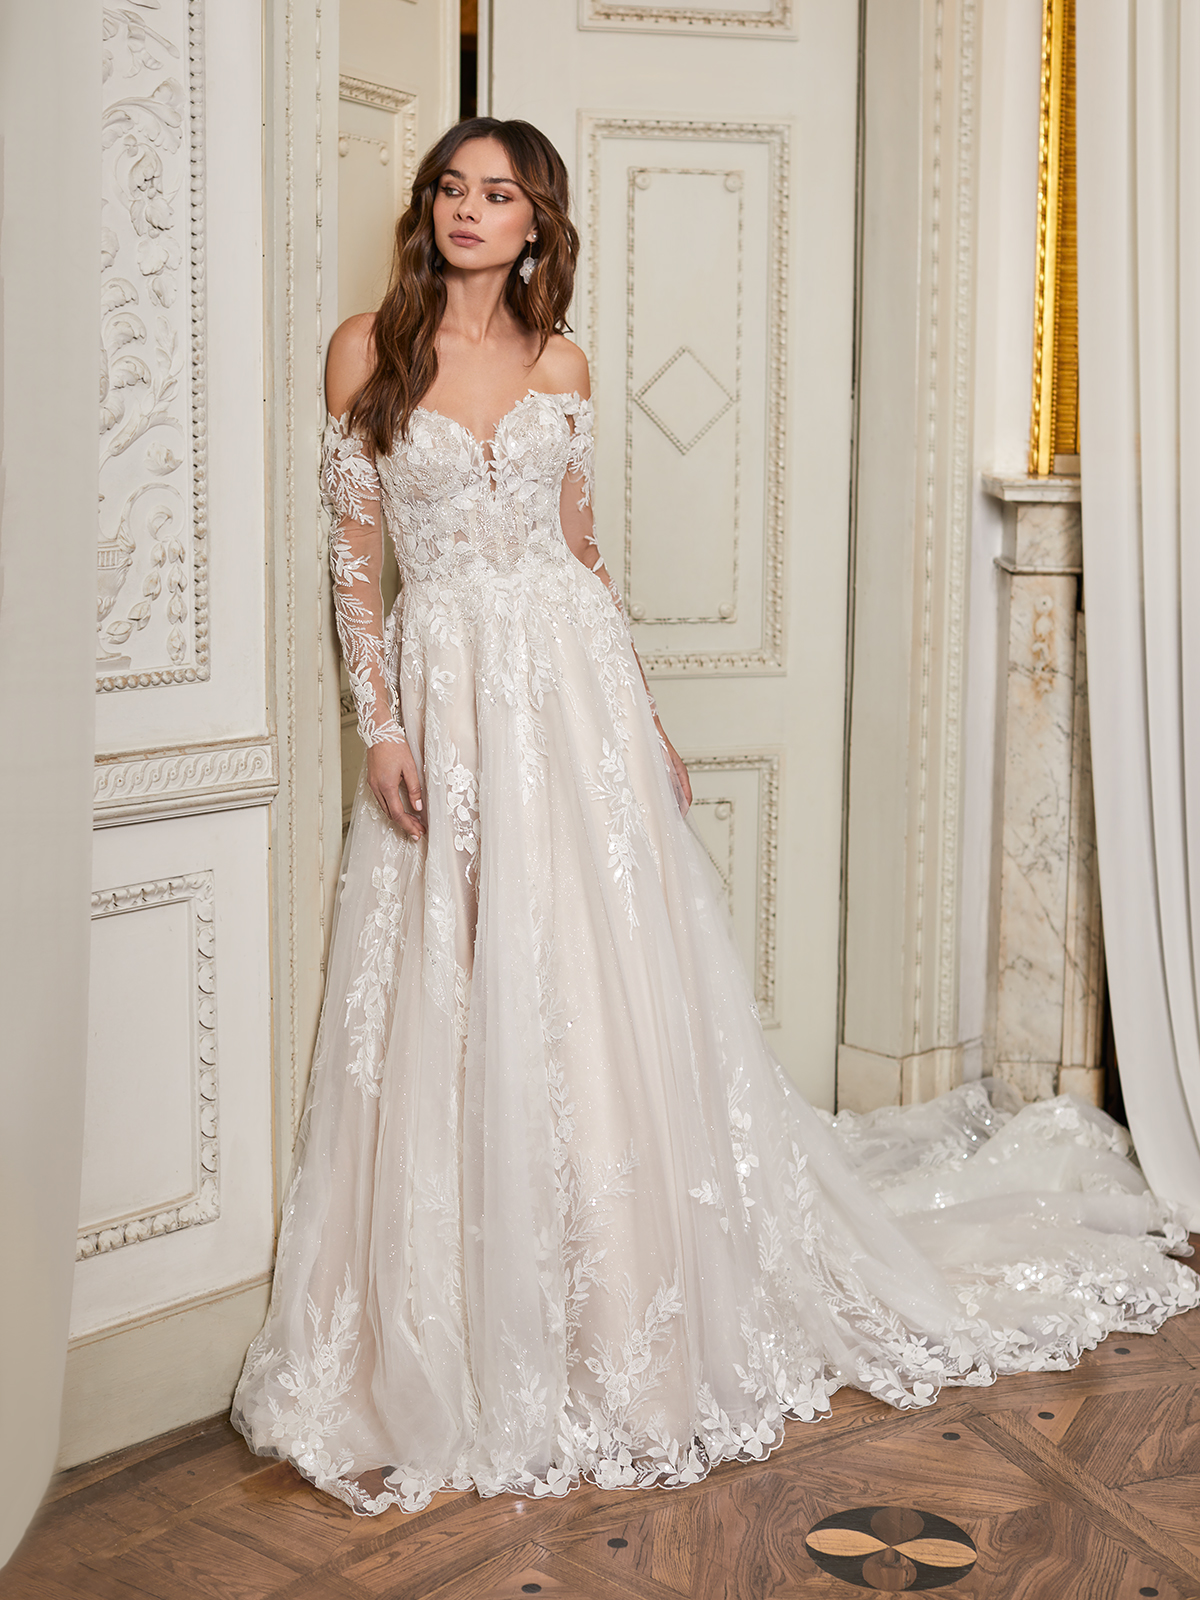 Winter Wedding Dresses Perfect for a Snowy Day  Winter wedding dress,  Winter bride, Amazing wedding dress